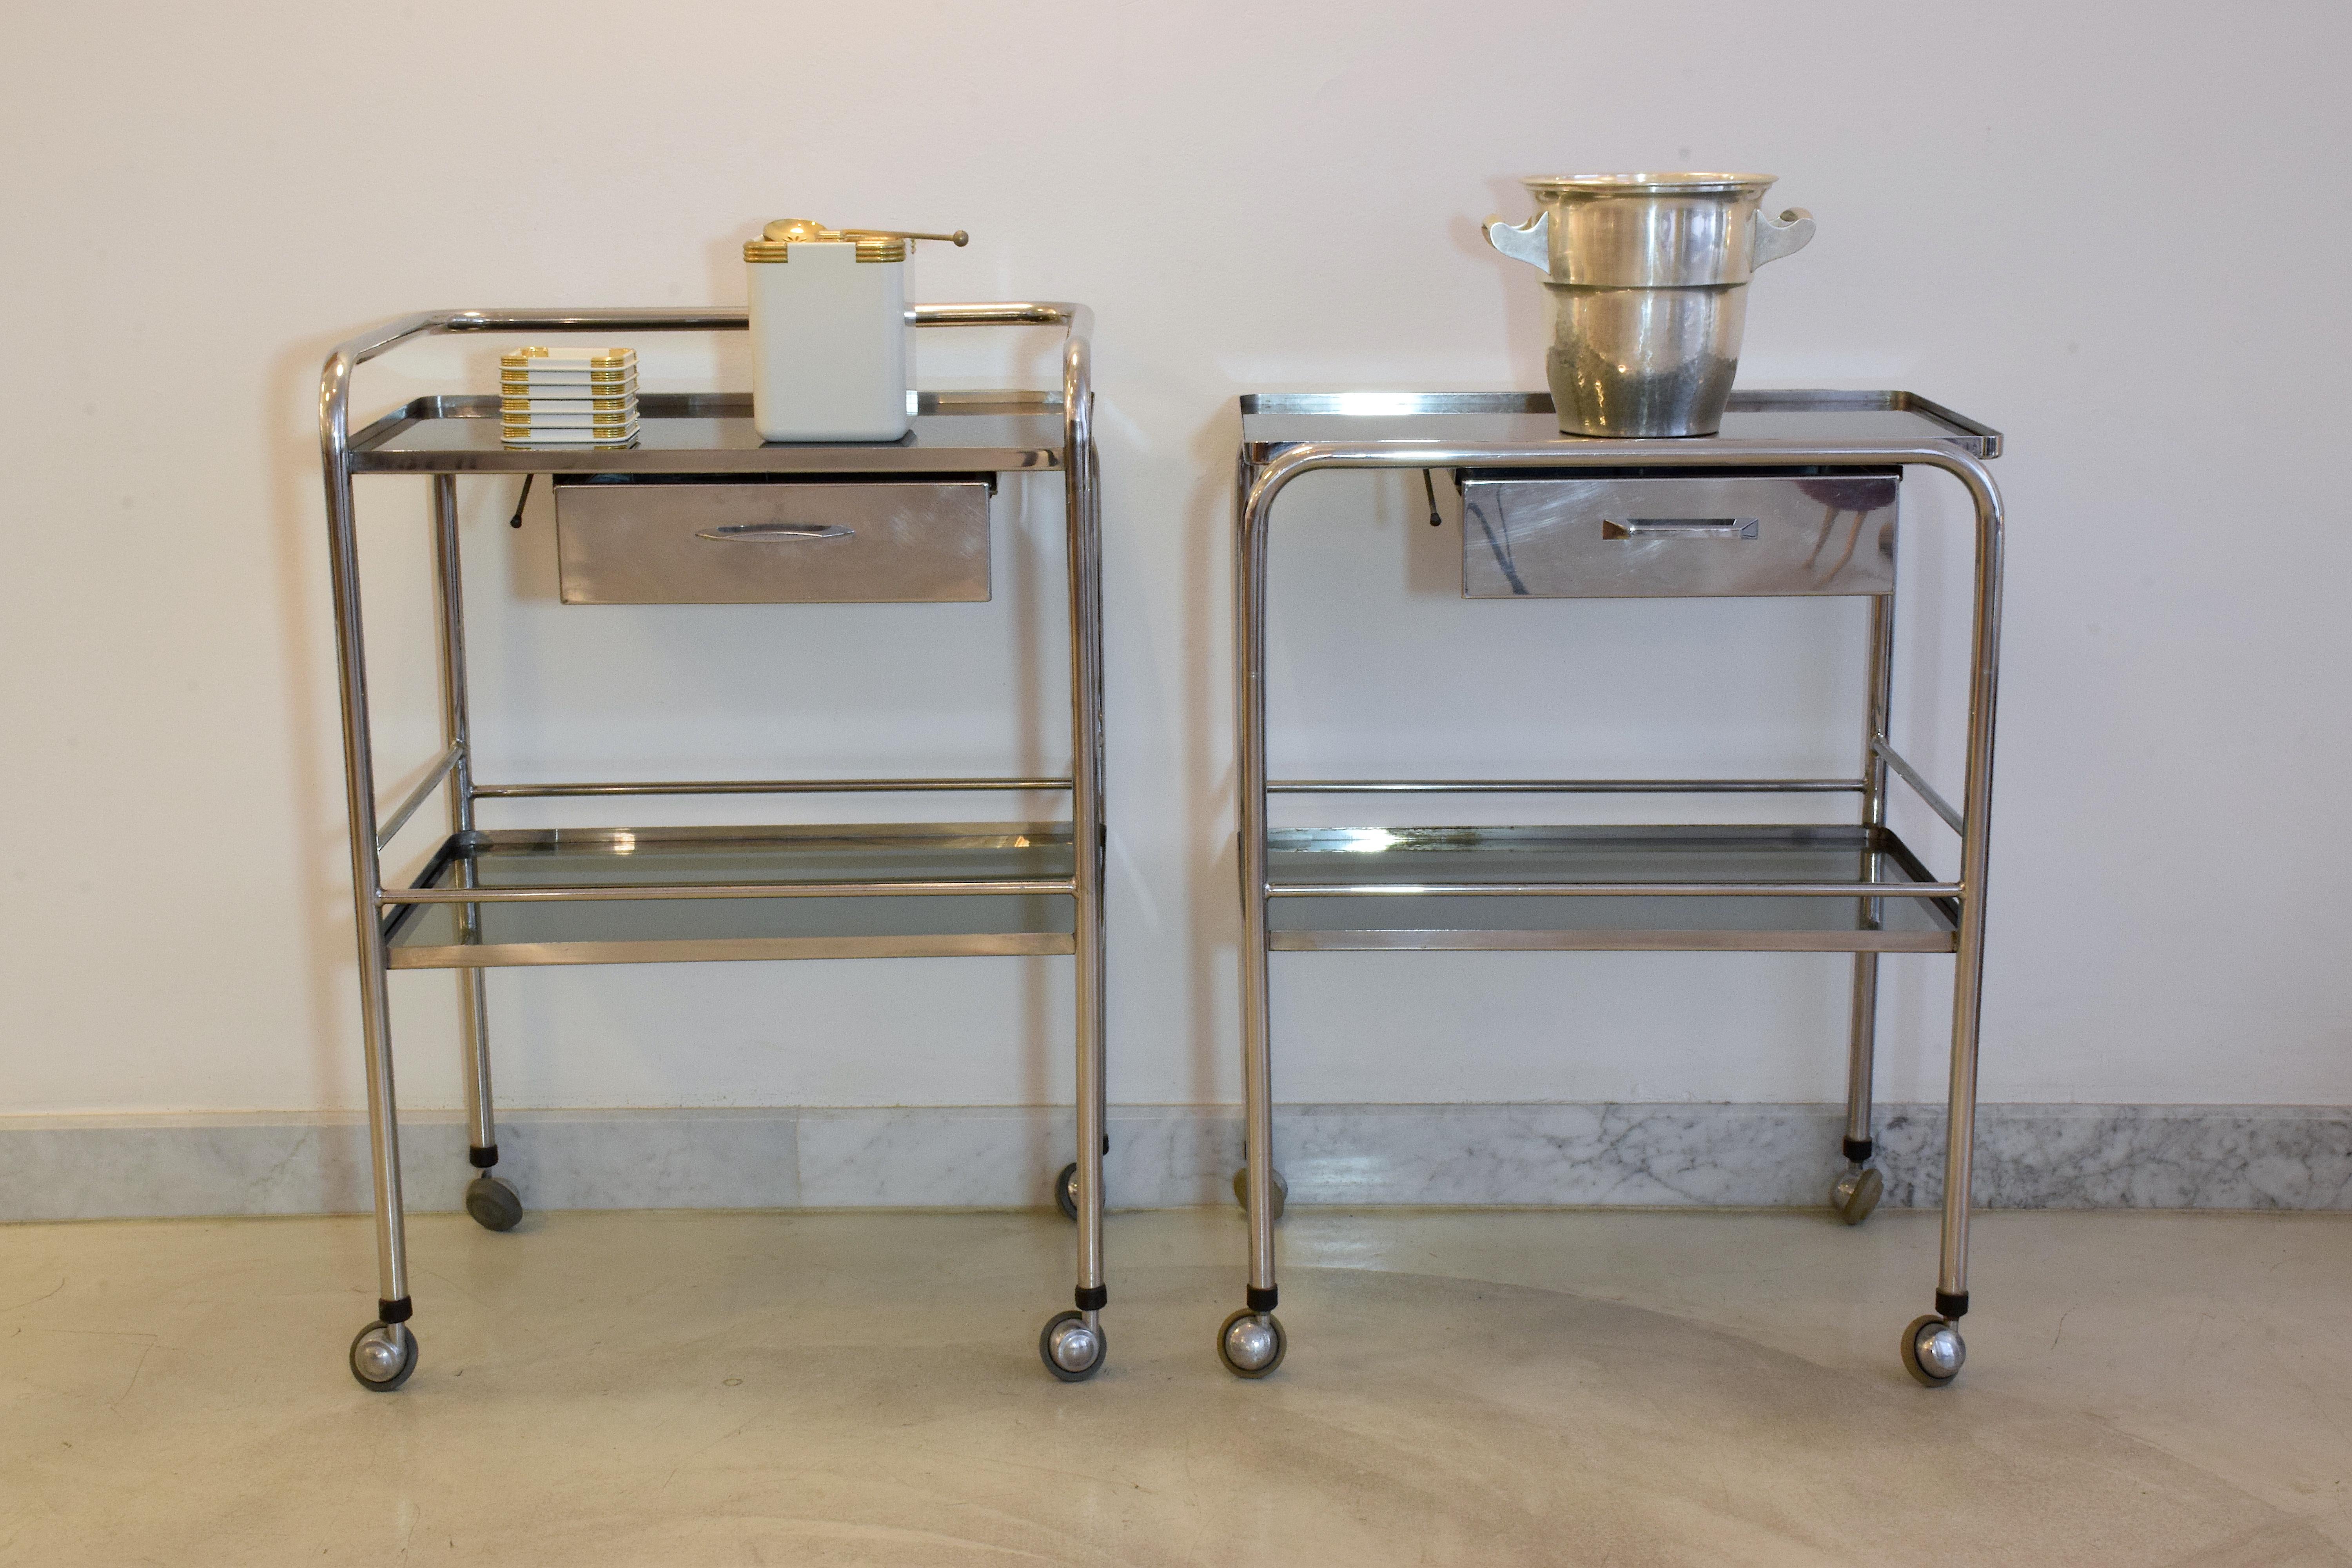 Industrial French Vintage Steel Cabinet Cart with Shelves and Rollers, 1960s